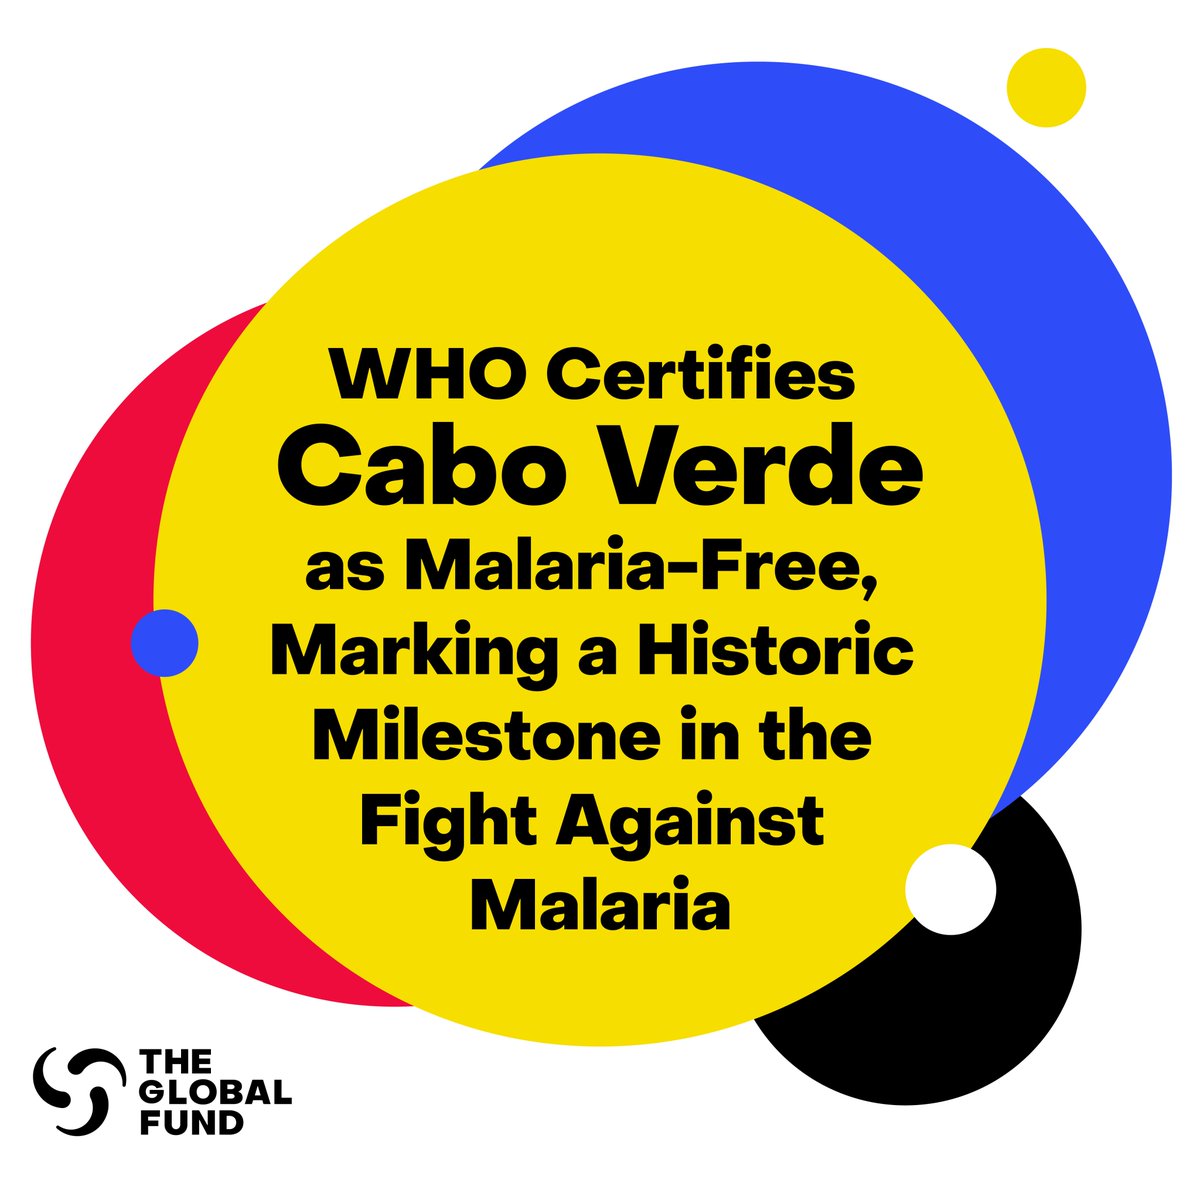 “An extraordinary accomplishment, a beacon of hope when climate change threatens to slow down our progress in the fight against malaria.” @PeterASands Since 2018, Cabo Verde achieved zero indigenous malaria cases and is now certified malaria-free by @WHO. ow.ly/EmNt50QqhnB